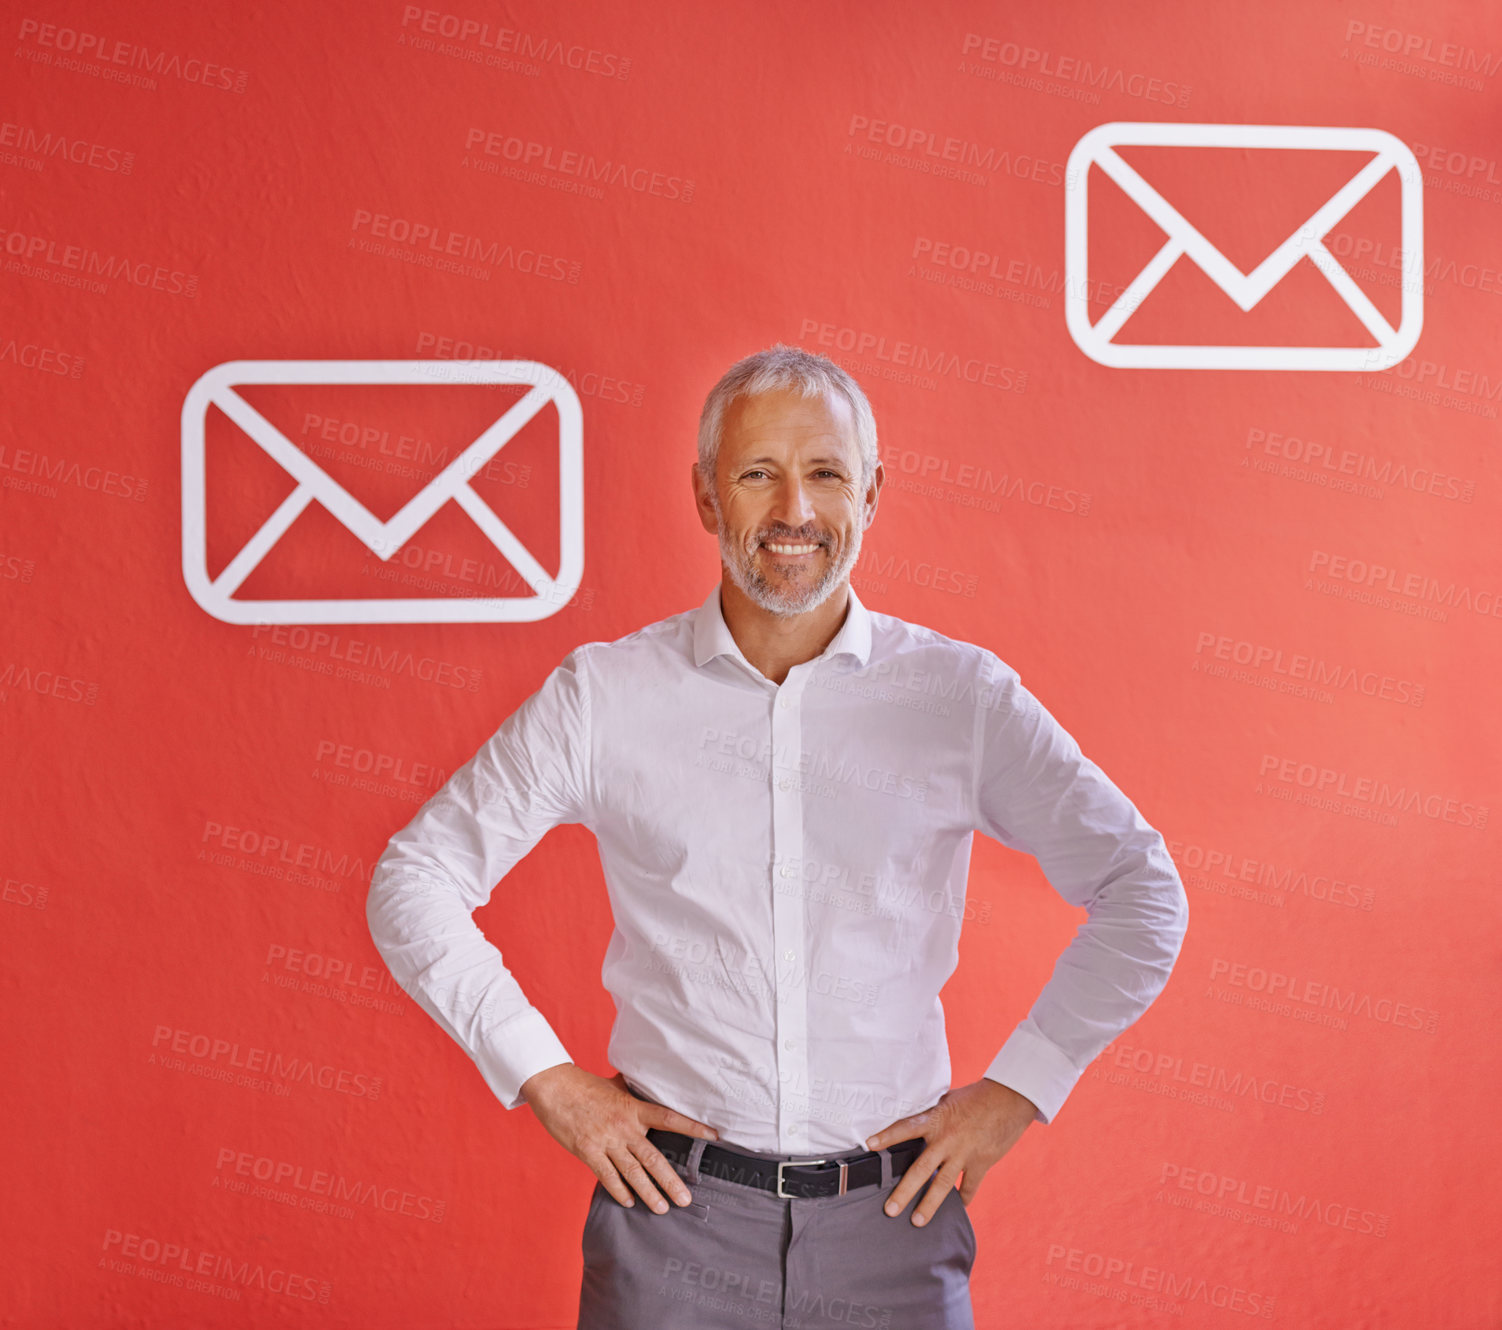 Buy stock photo Portrait of a mature businessman standing against a red background with message symbols on it